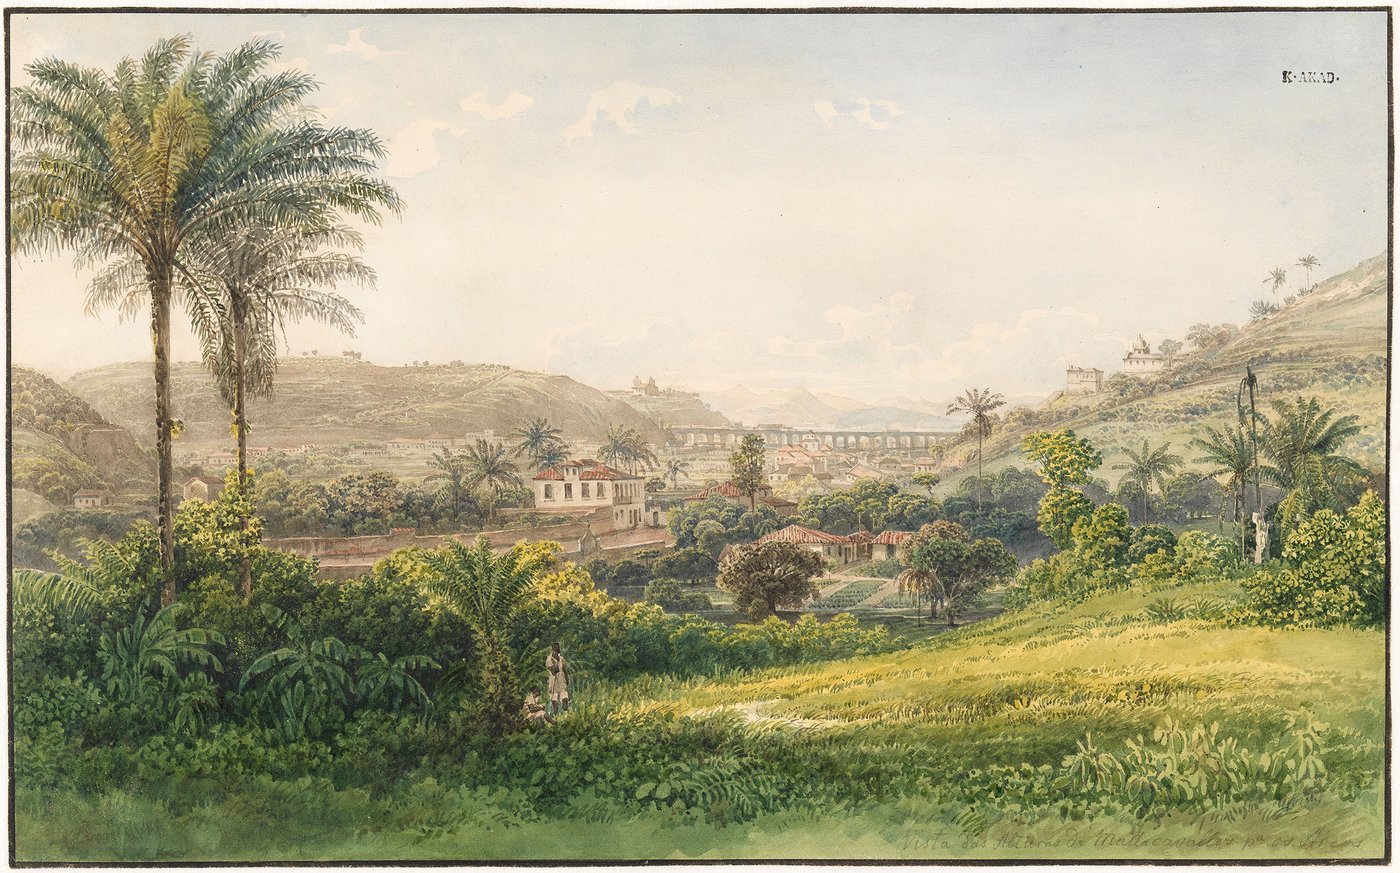 Depicted is a view of the lush tropical landscape and some buildings of Rio de Janeiro. An aqueduct cuts through the landscape between the rolling hills covered with palm trees and banana plants on the right and left of the picture.